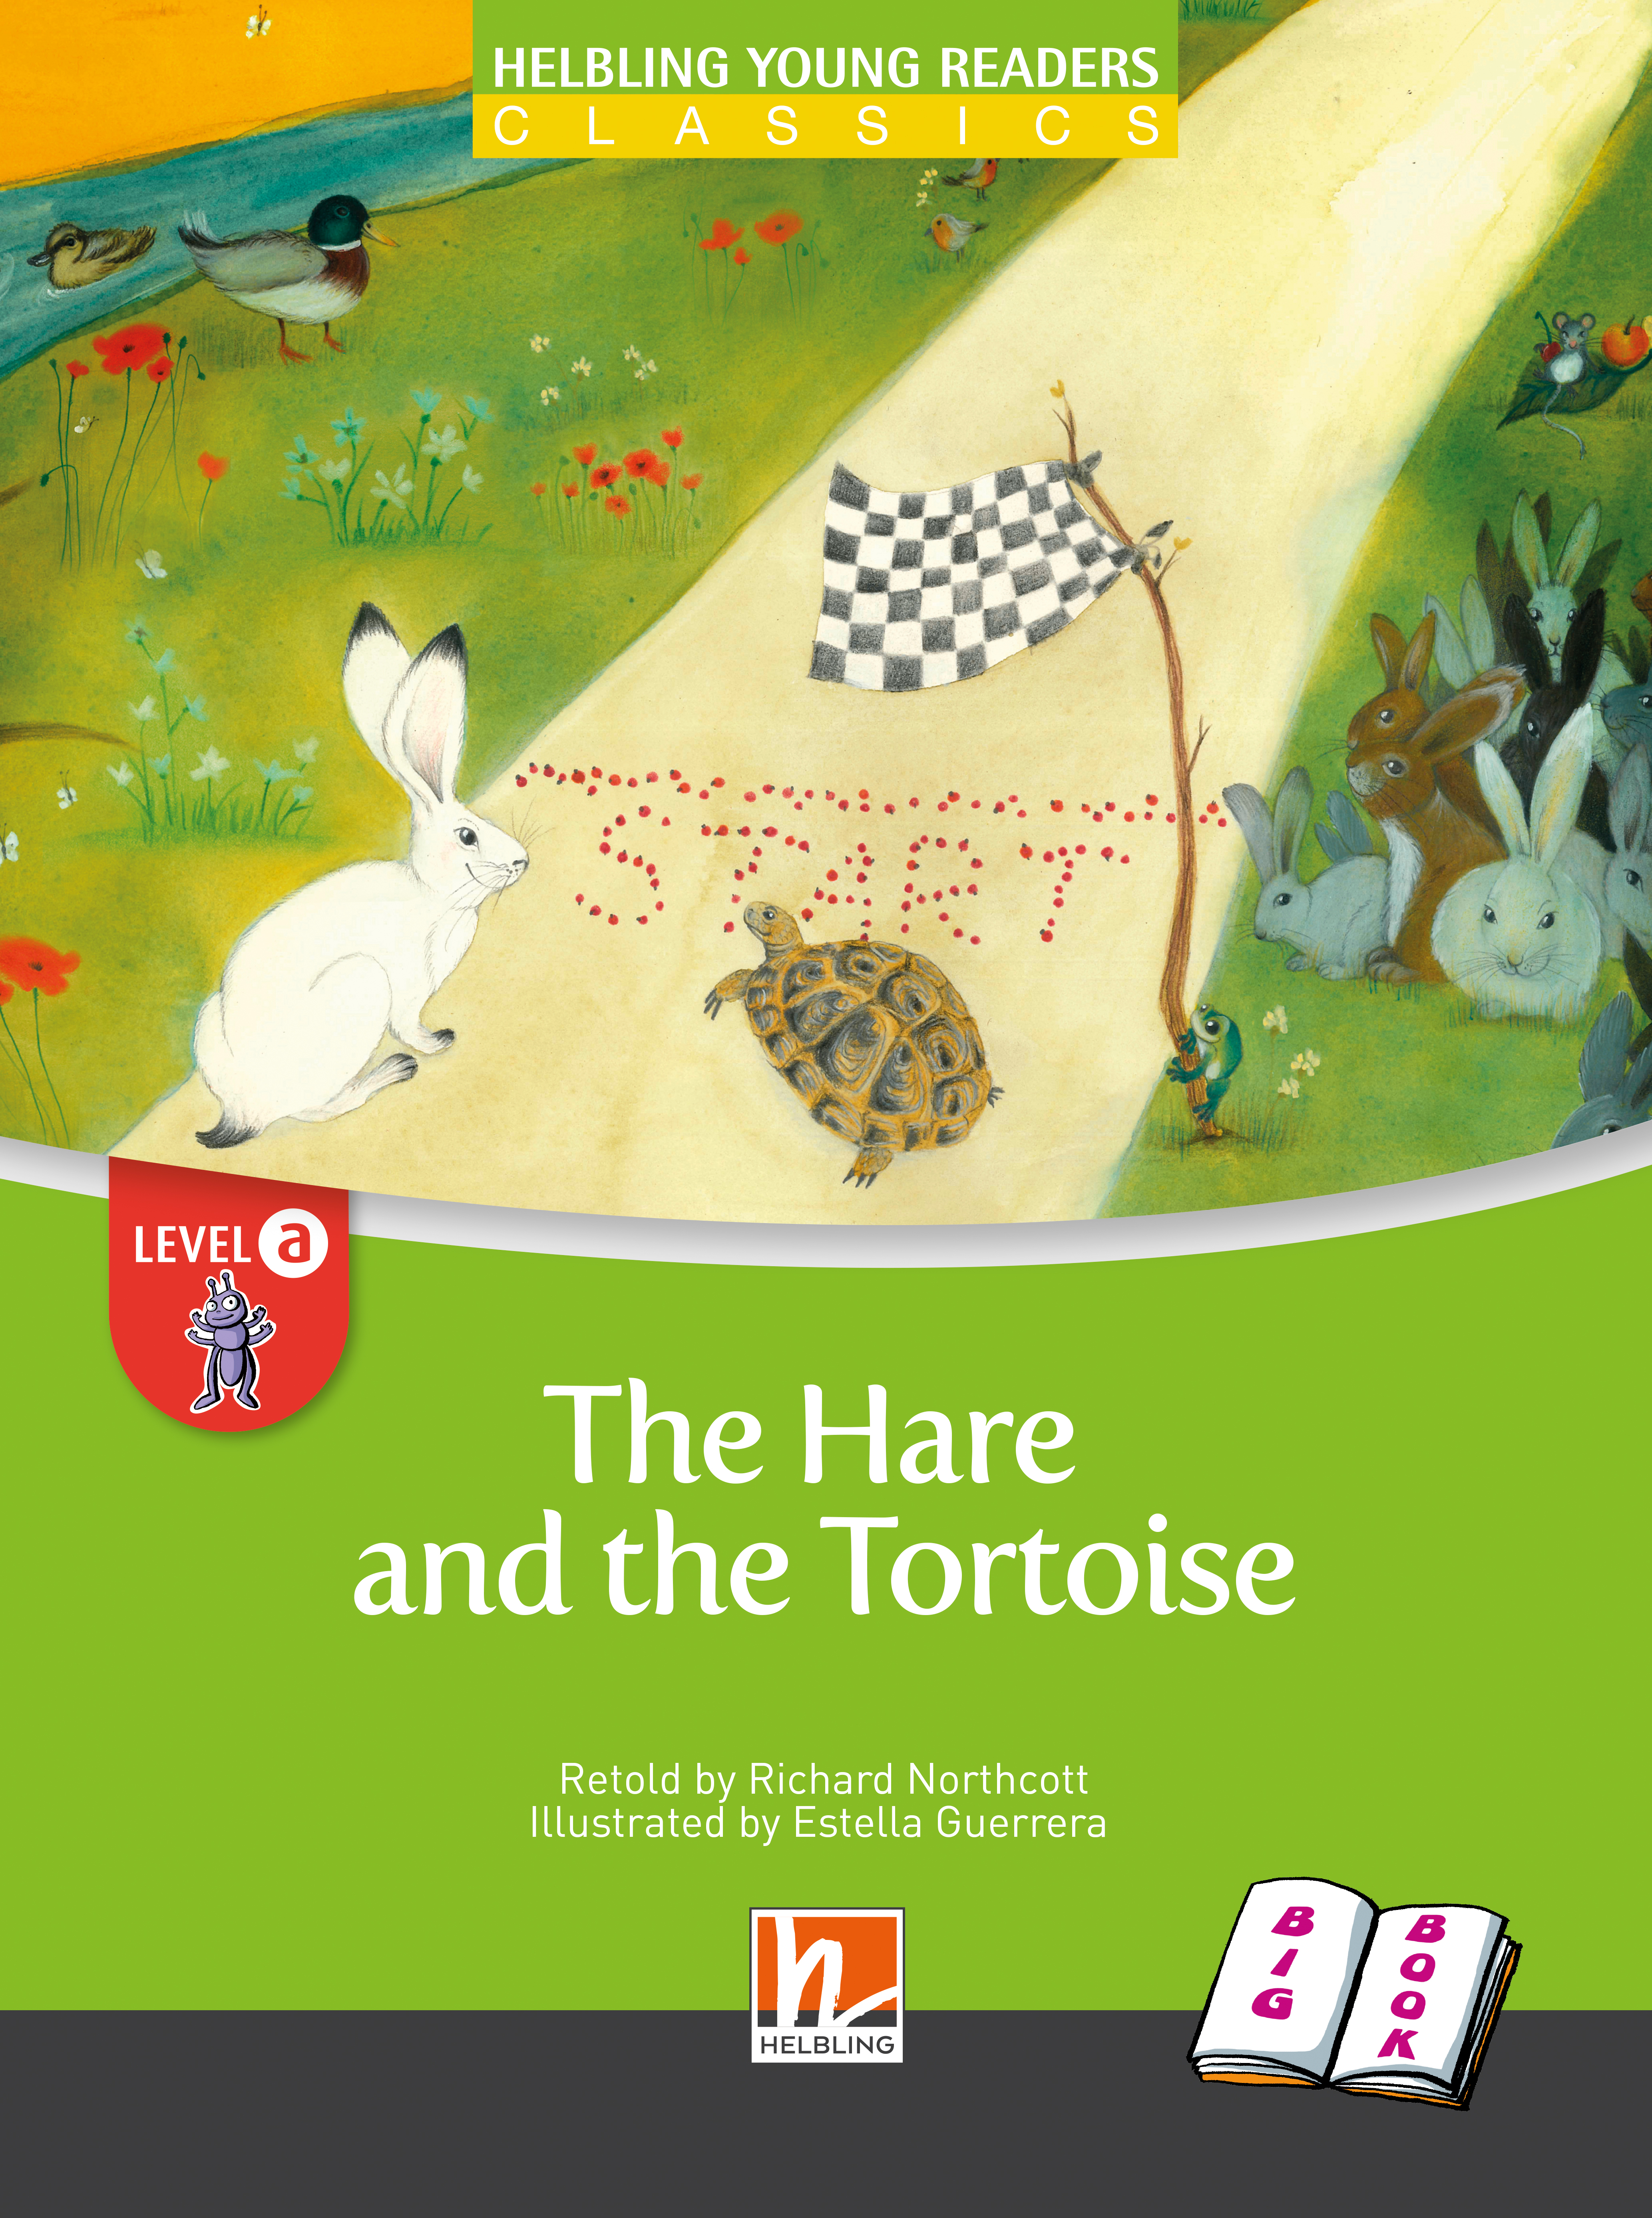 Helbling Young Readers - A: The Hare And The Tortoise [Big Book]